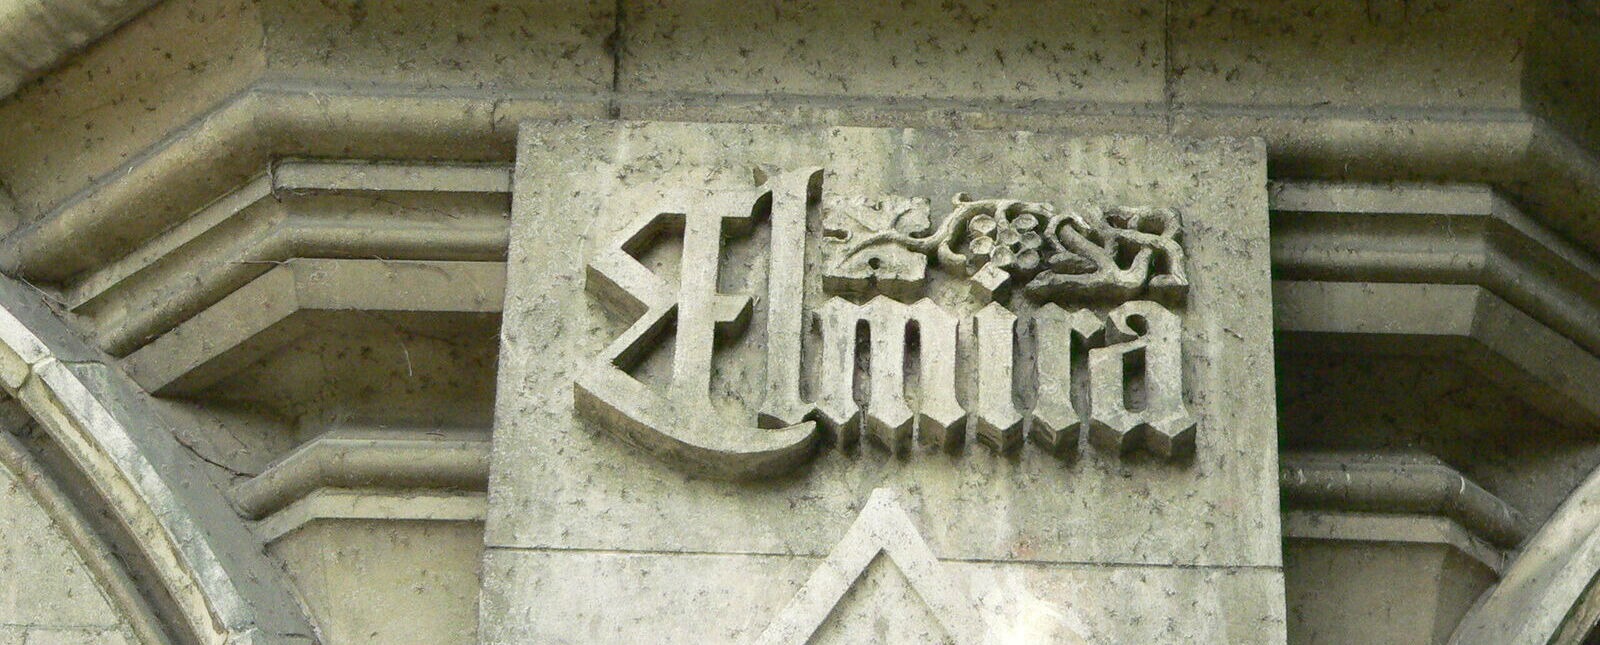 Elmira is carved in stone adorning one of the buildings